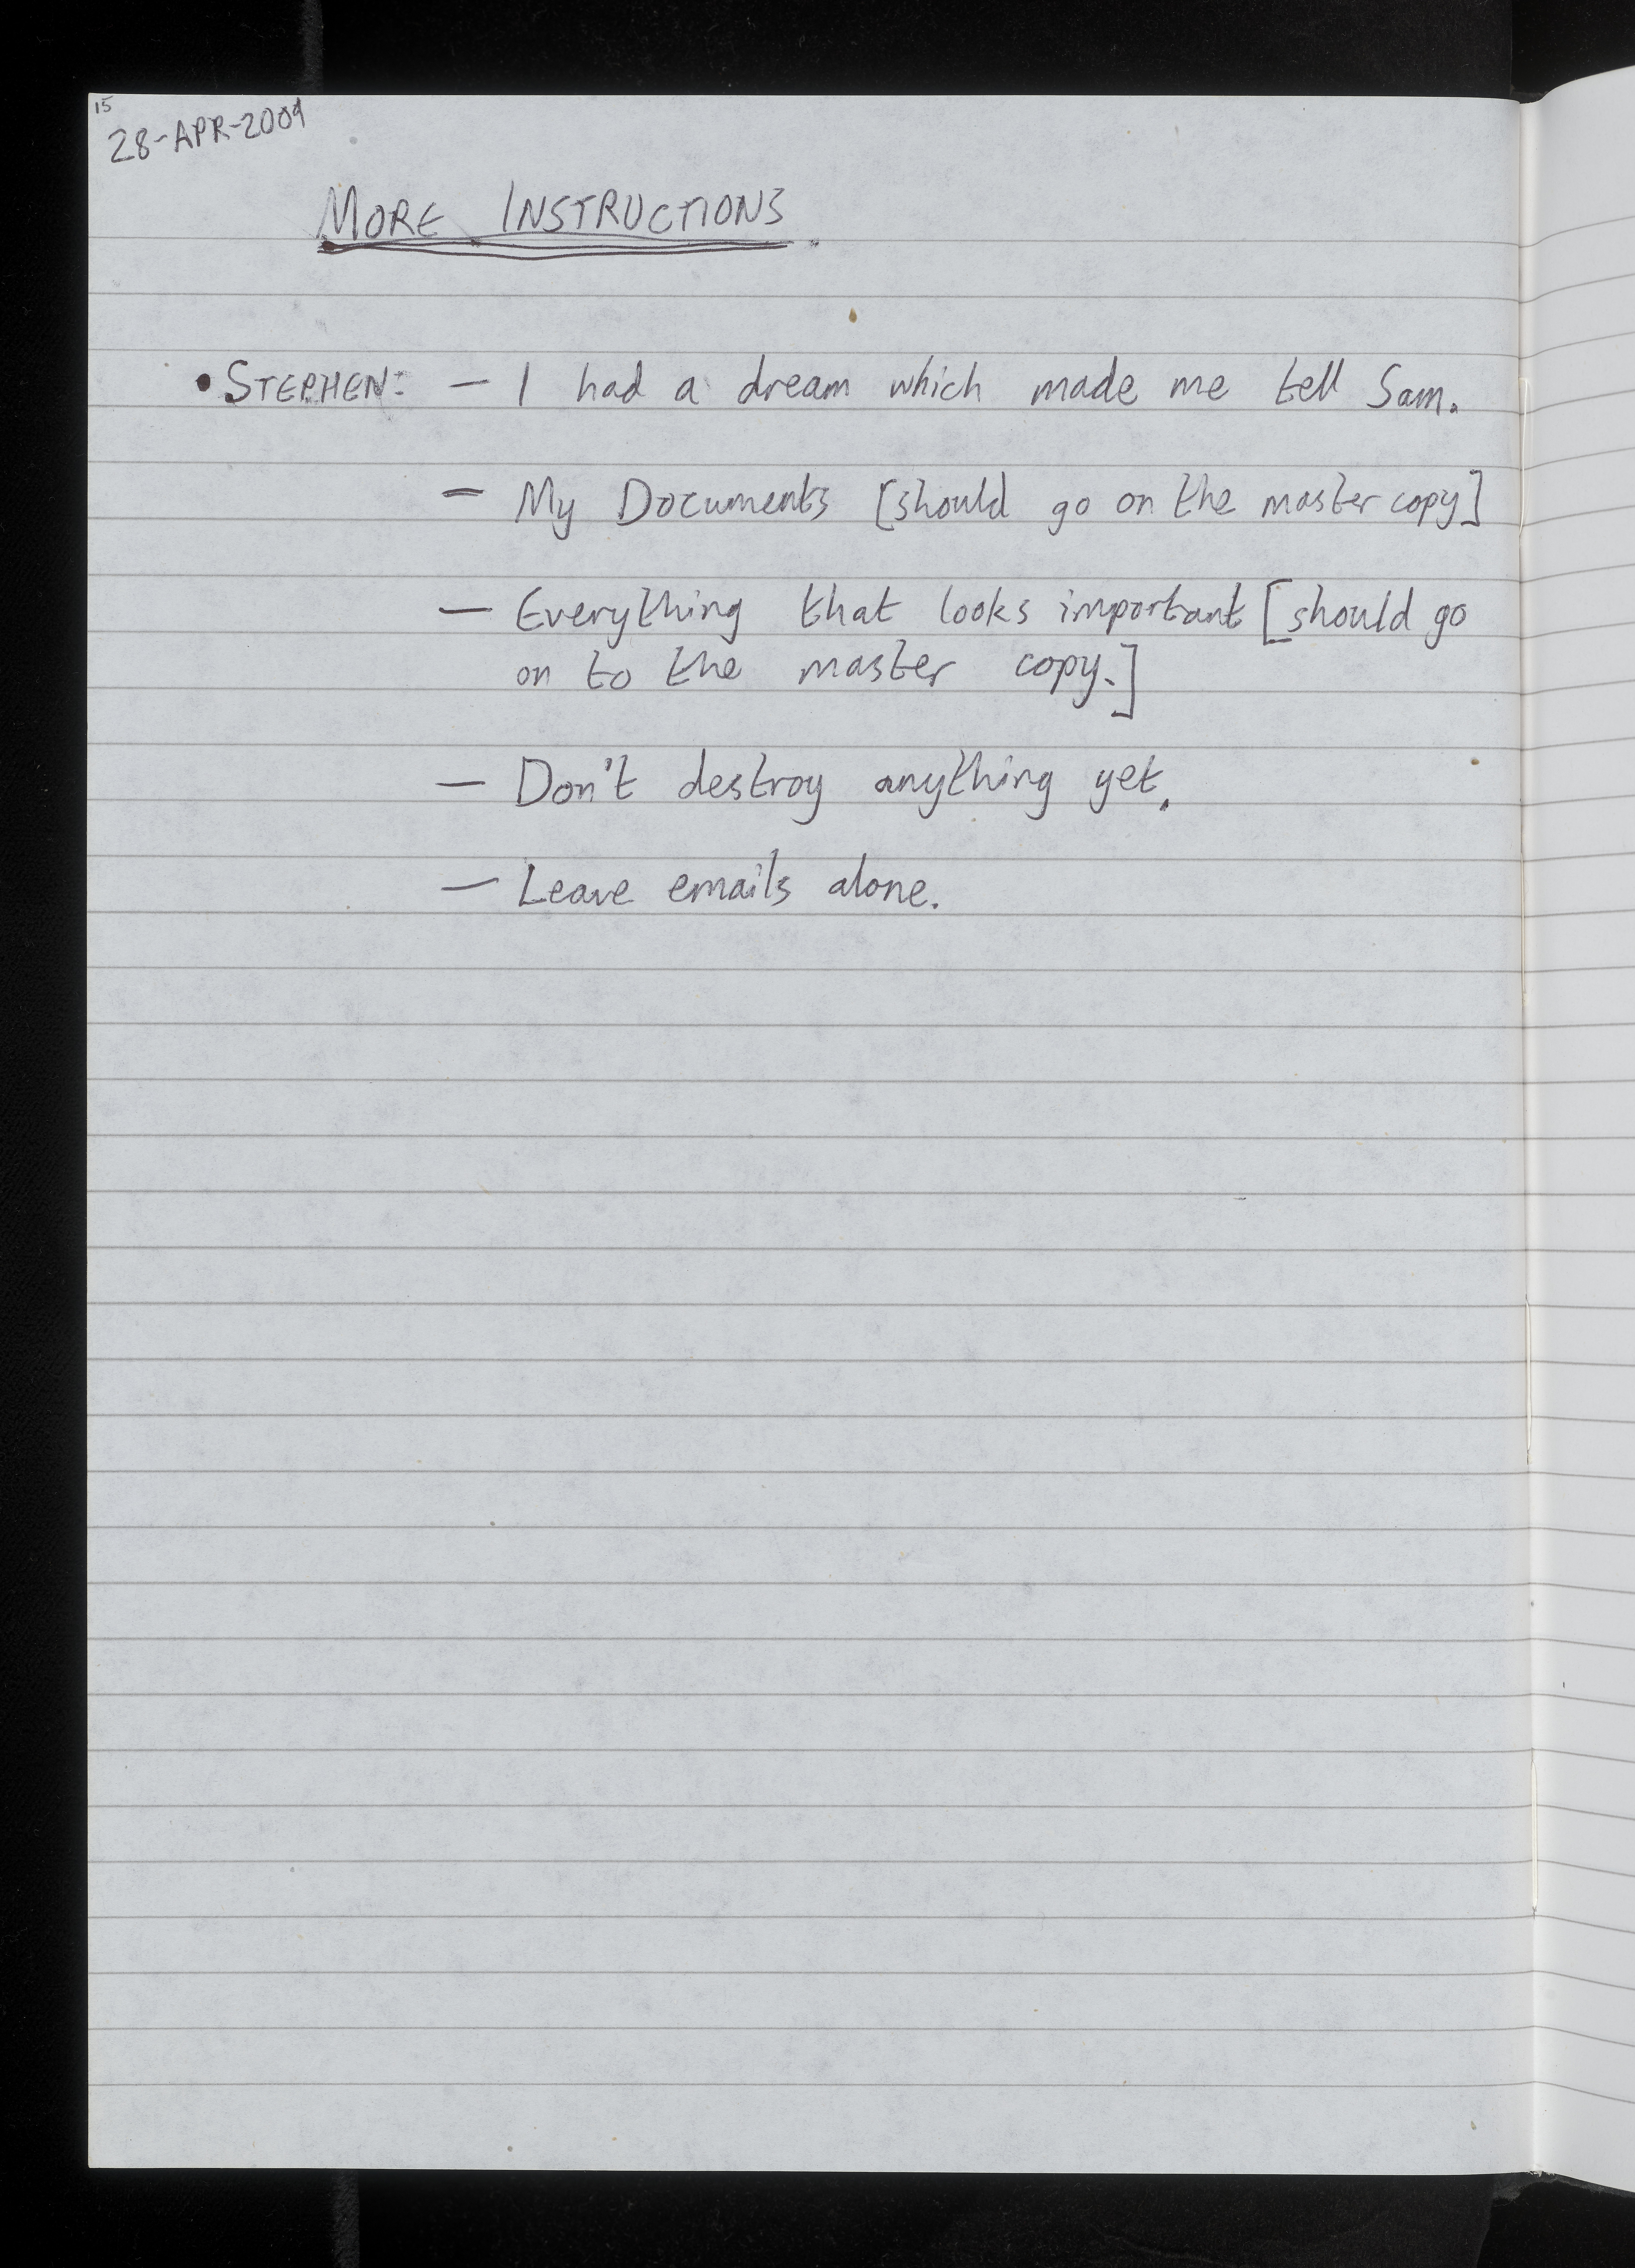 A page from the notebook of Hawking’s graduate assistant